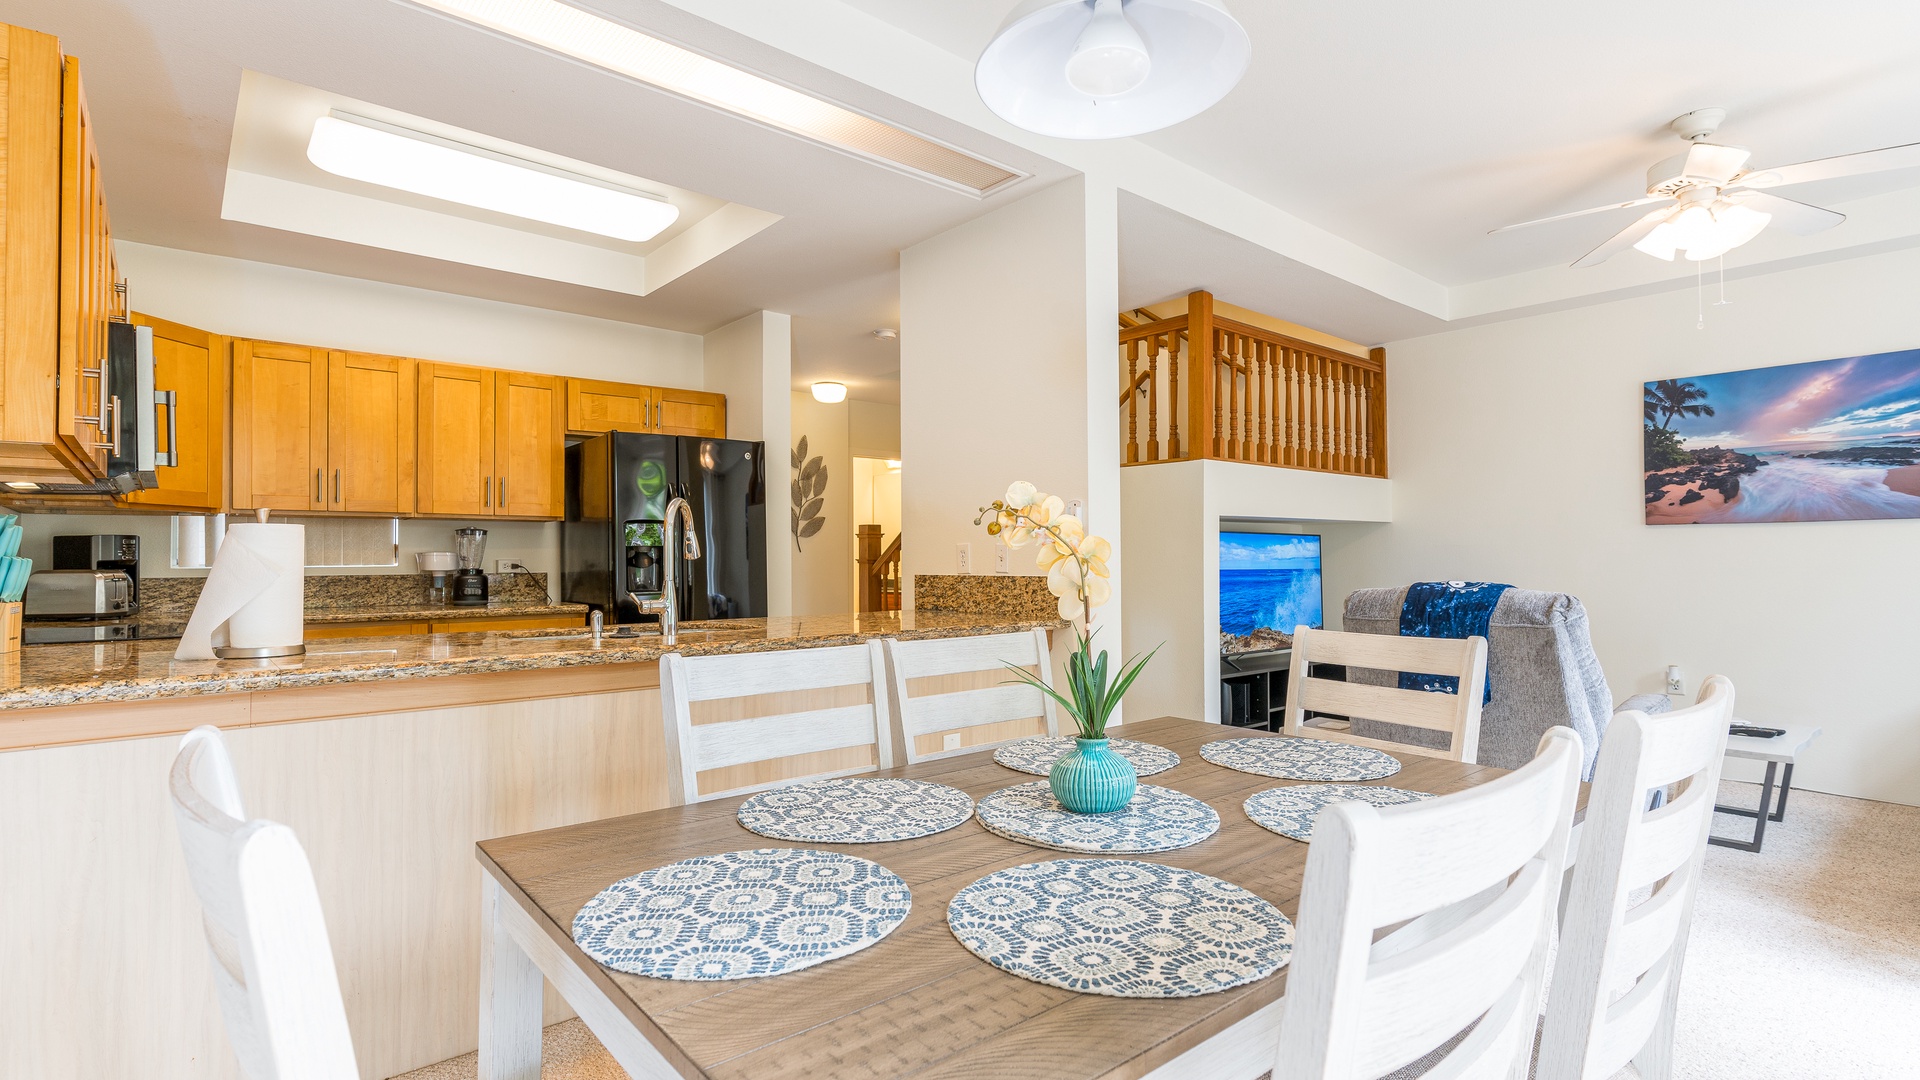 Kapolei Vacation Rentals, Fairways at Ko Olina 27H - The dining area for game night or a delightful meal.